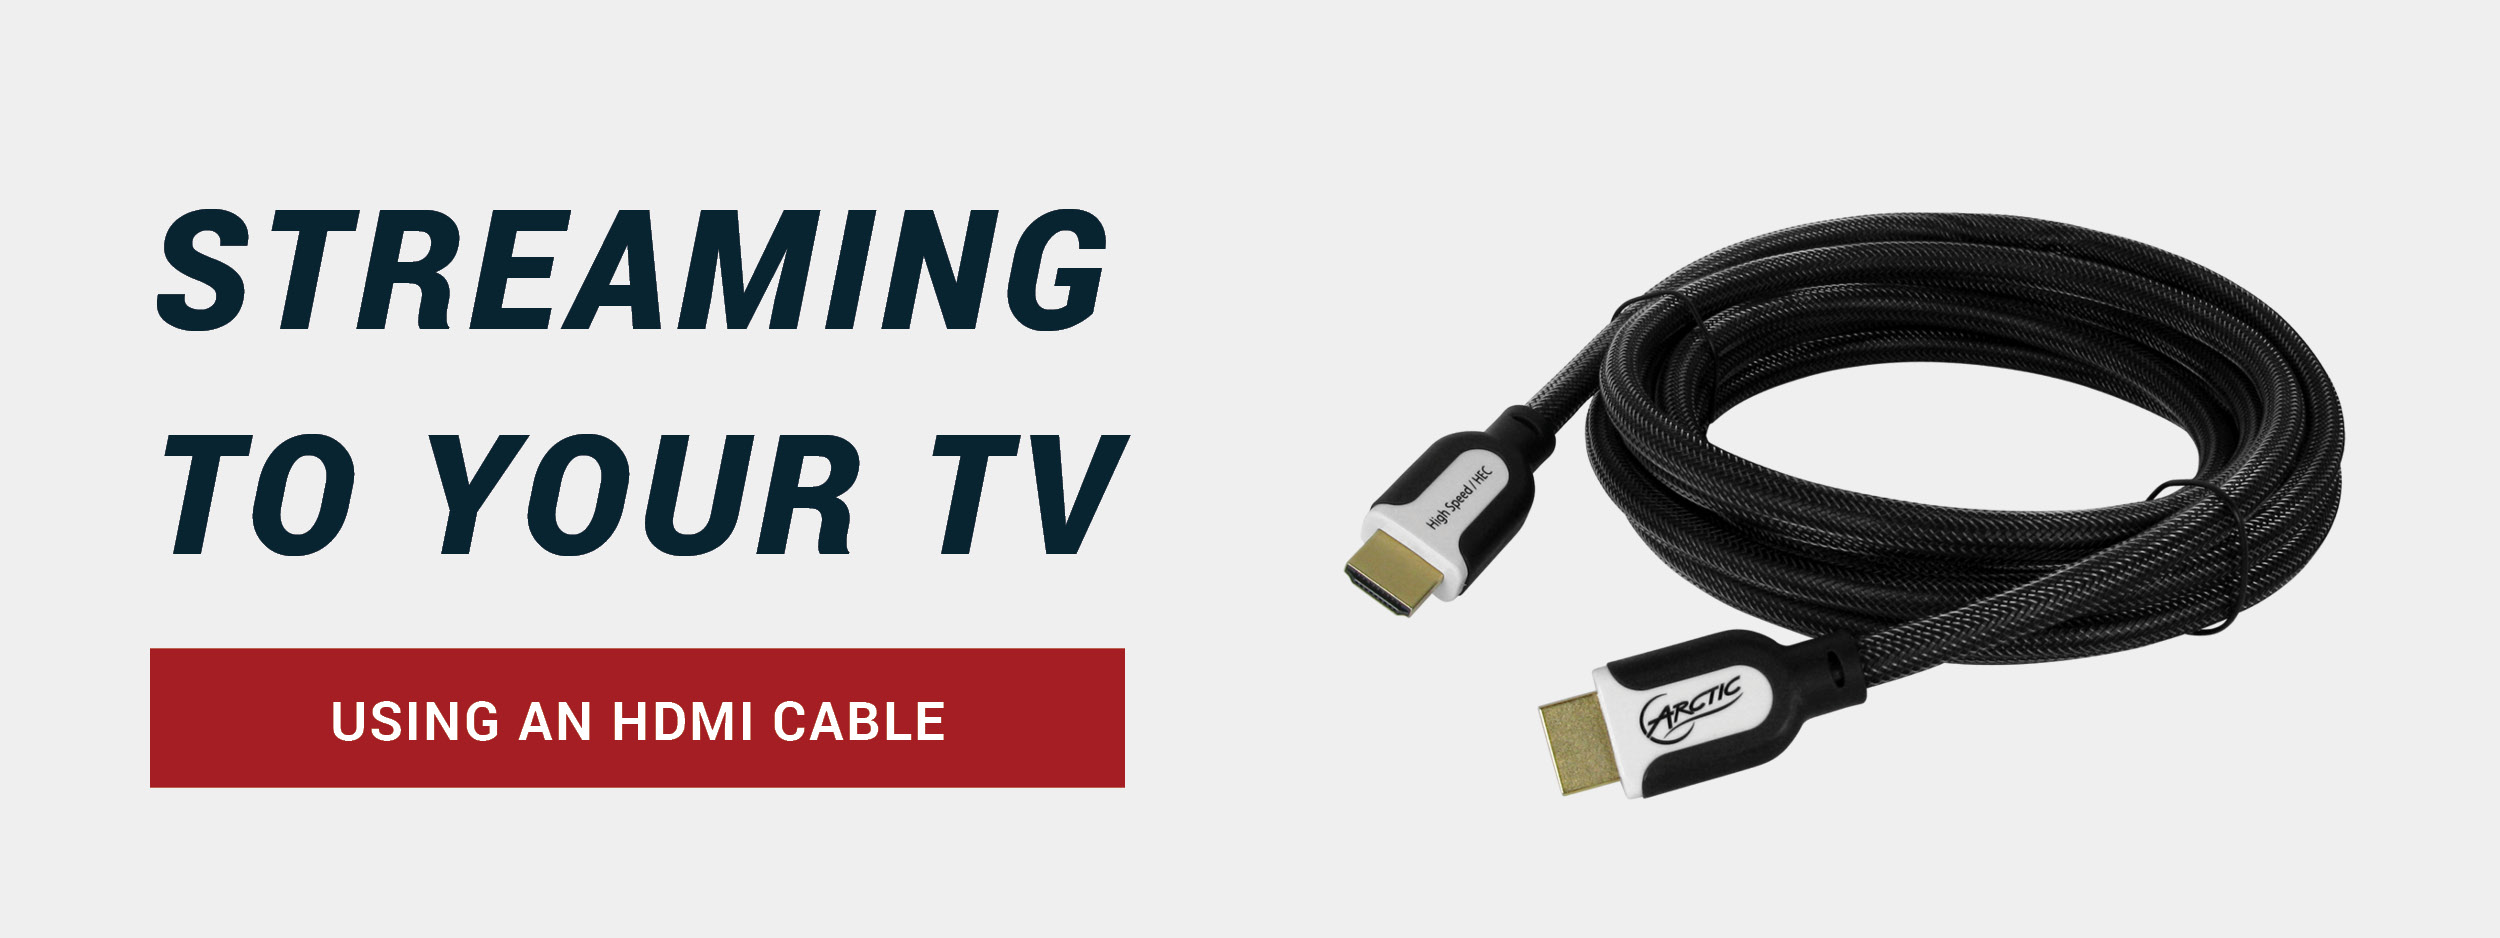 Stream using an HDMI Cable